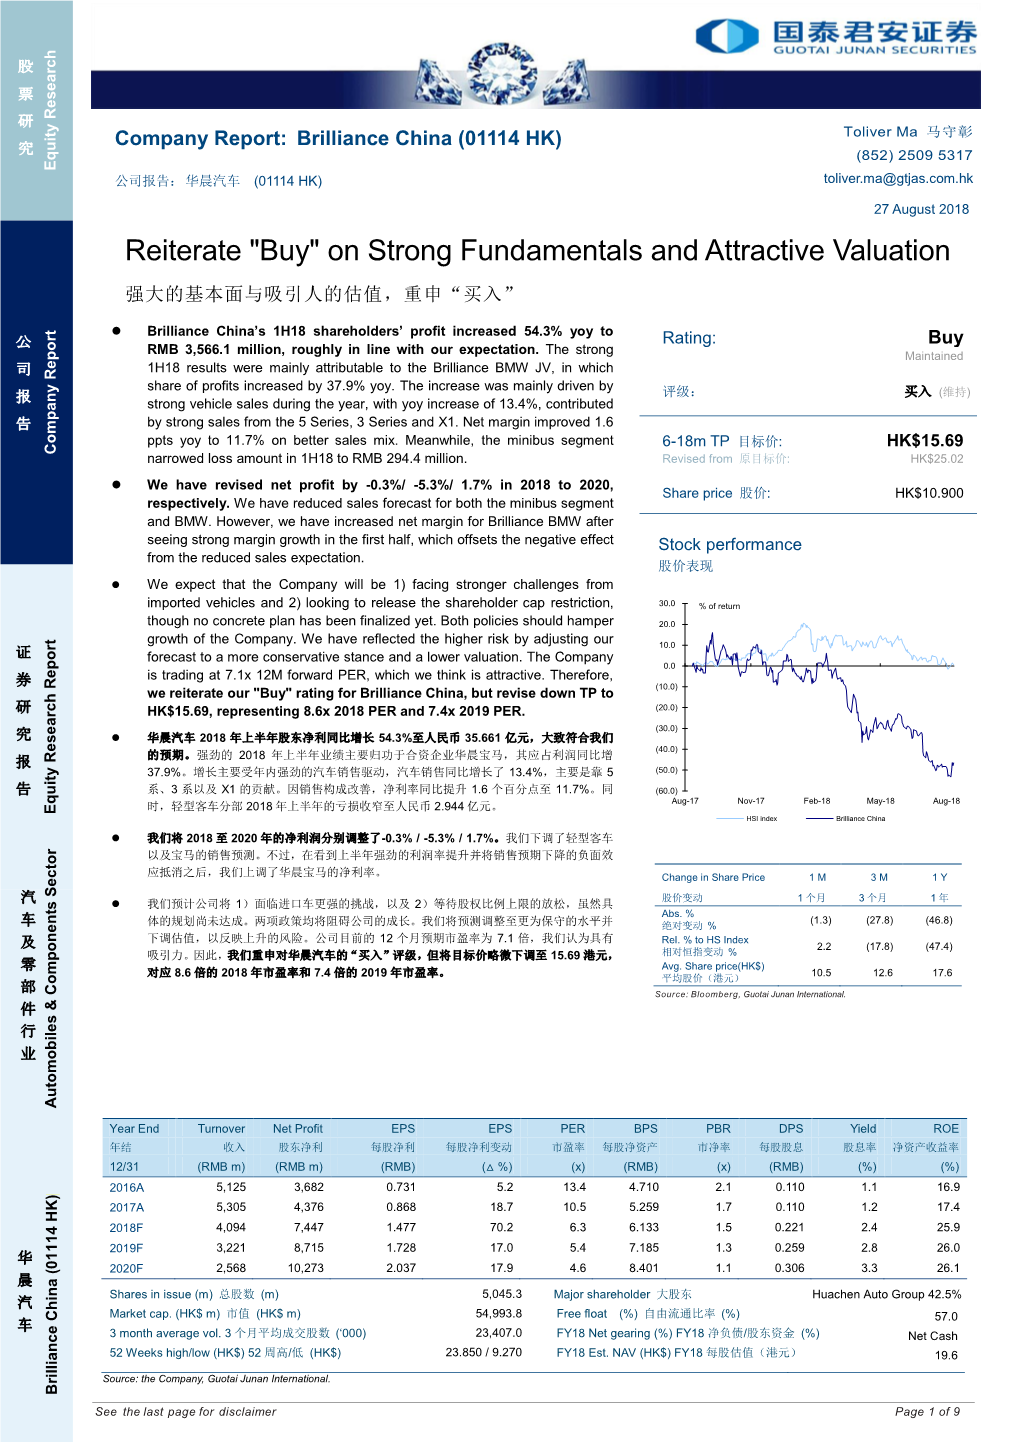 Reiterate "Buy" on Strong Fundamentals and Attractive Valuation 强大的基本面与吸引人的估值，重申“买入”